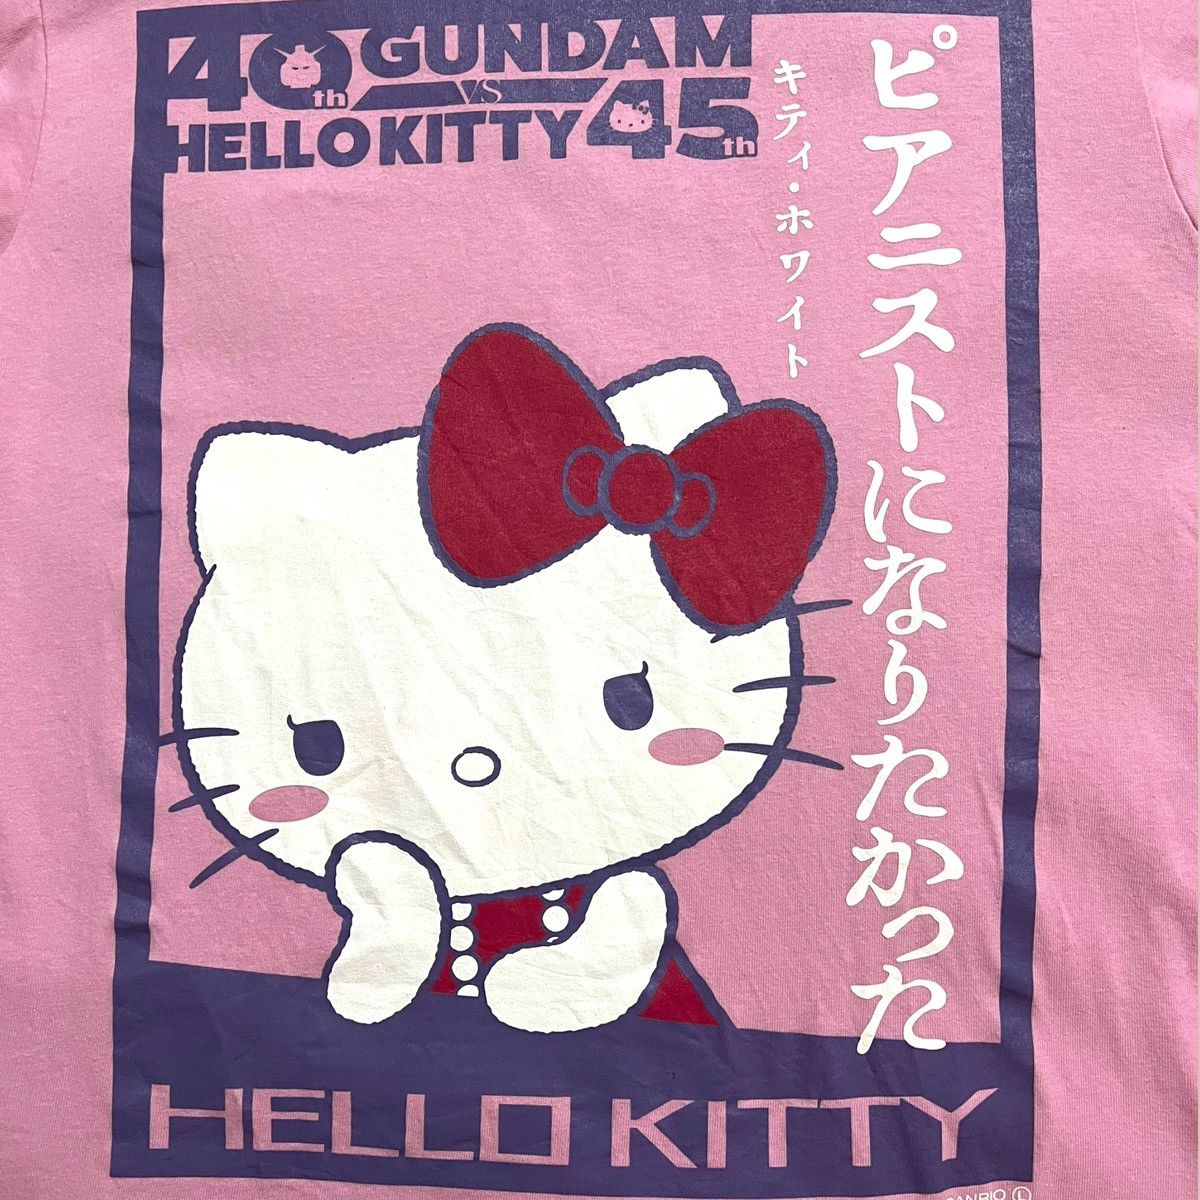 Japanese Brand LIMITED EDITION 2019 GUNDAM X HELLO KITTY PINK TEE IN PINK Size US M / EU 48-50 / 2 - 2 Preview